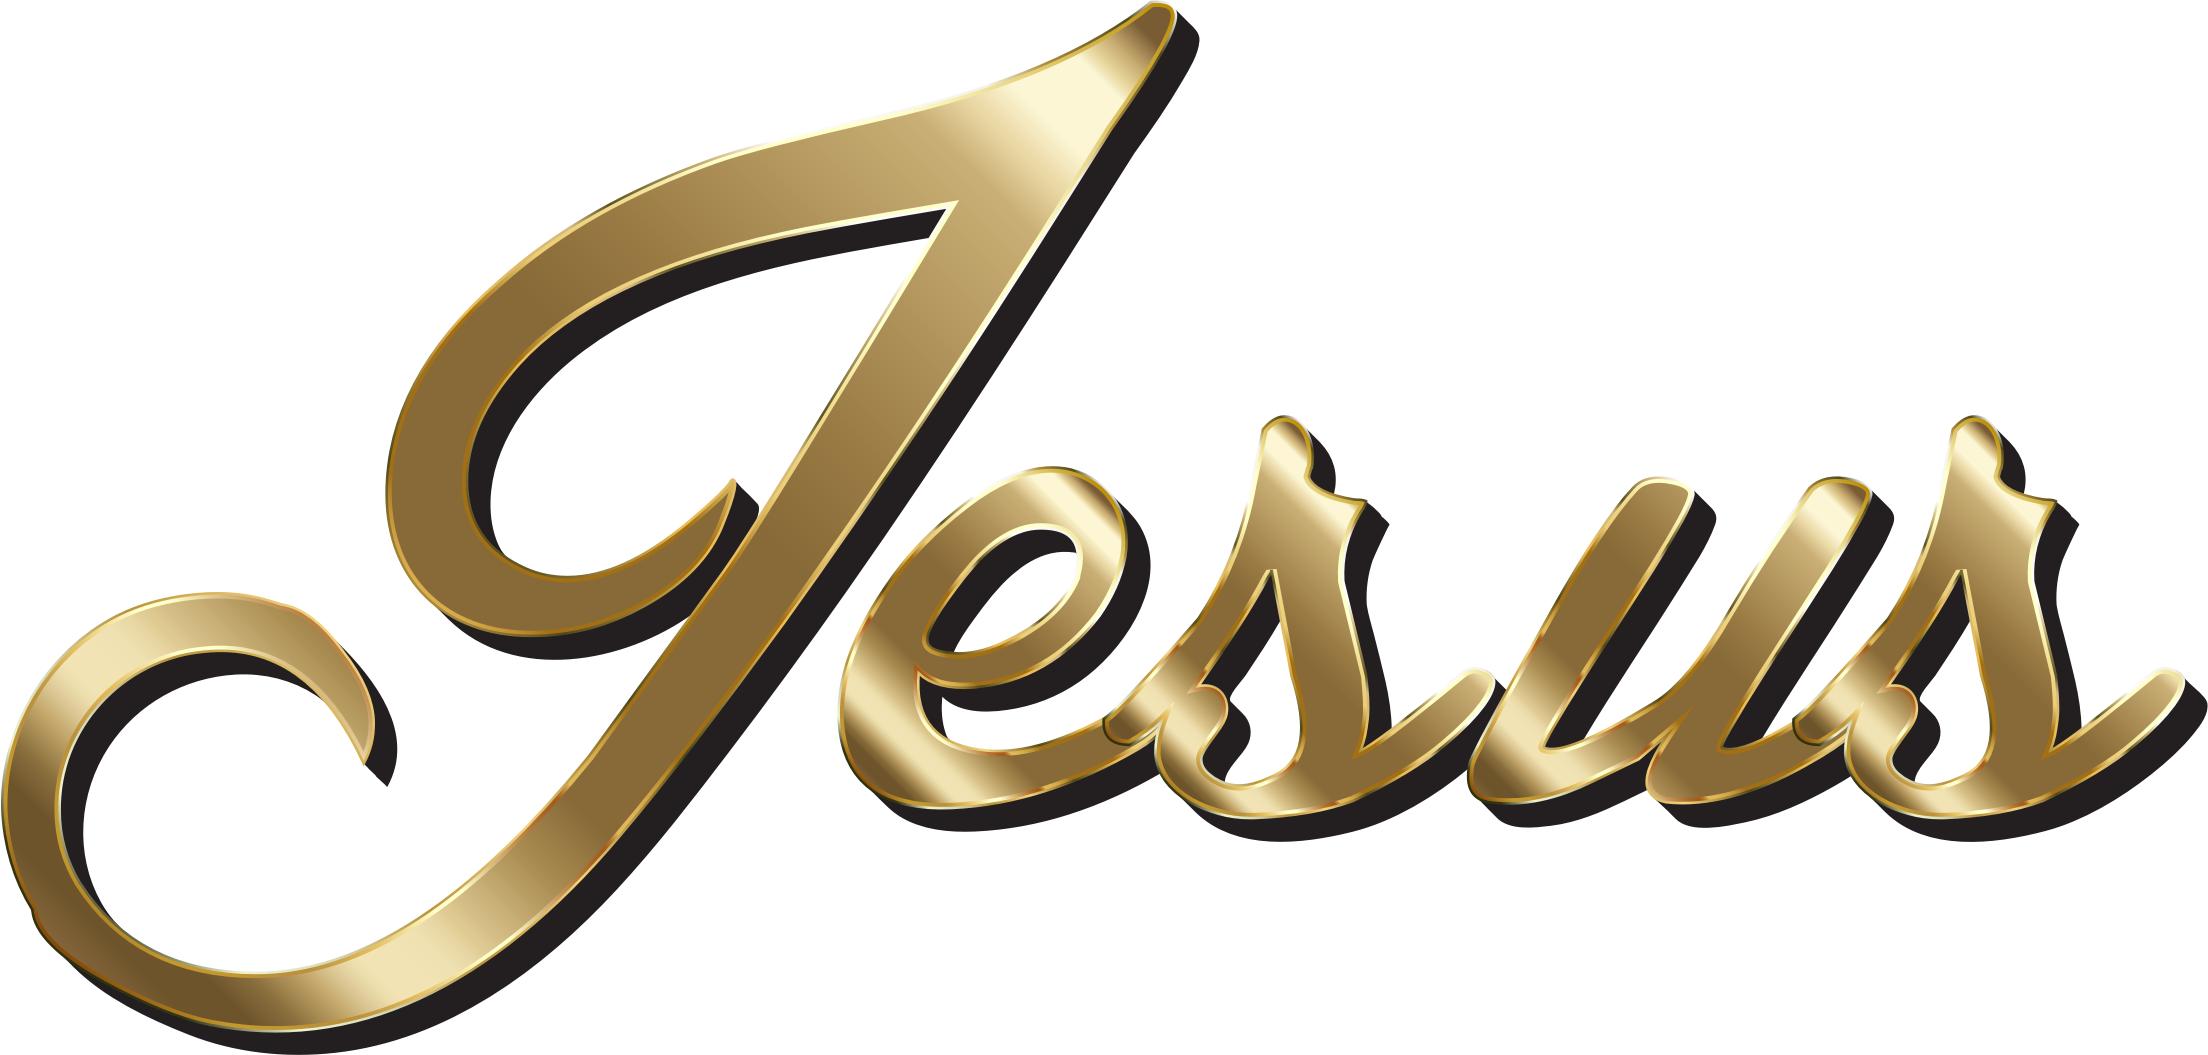 Jesus Polished Copper Typography png